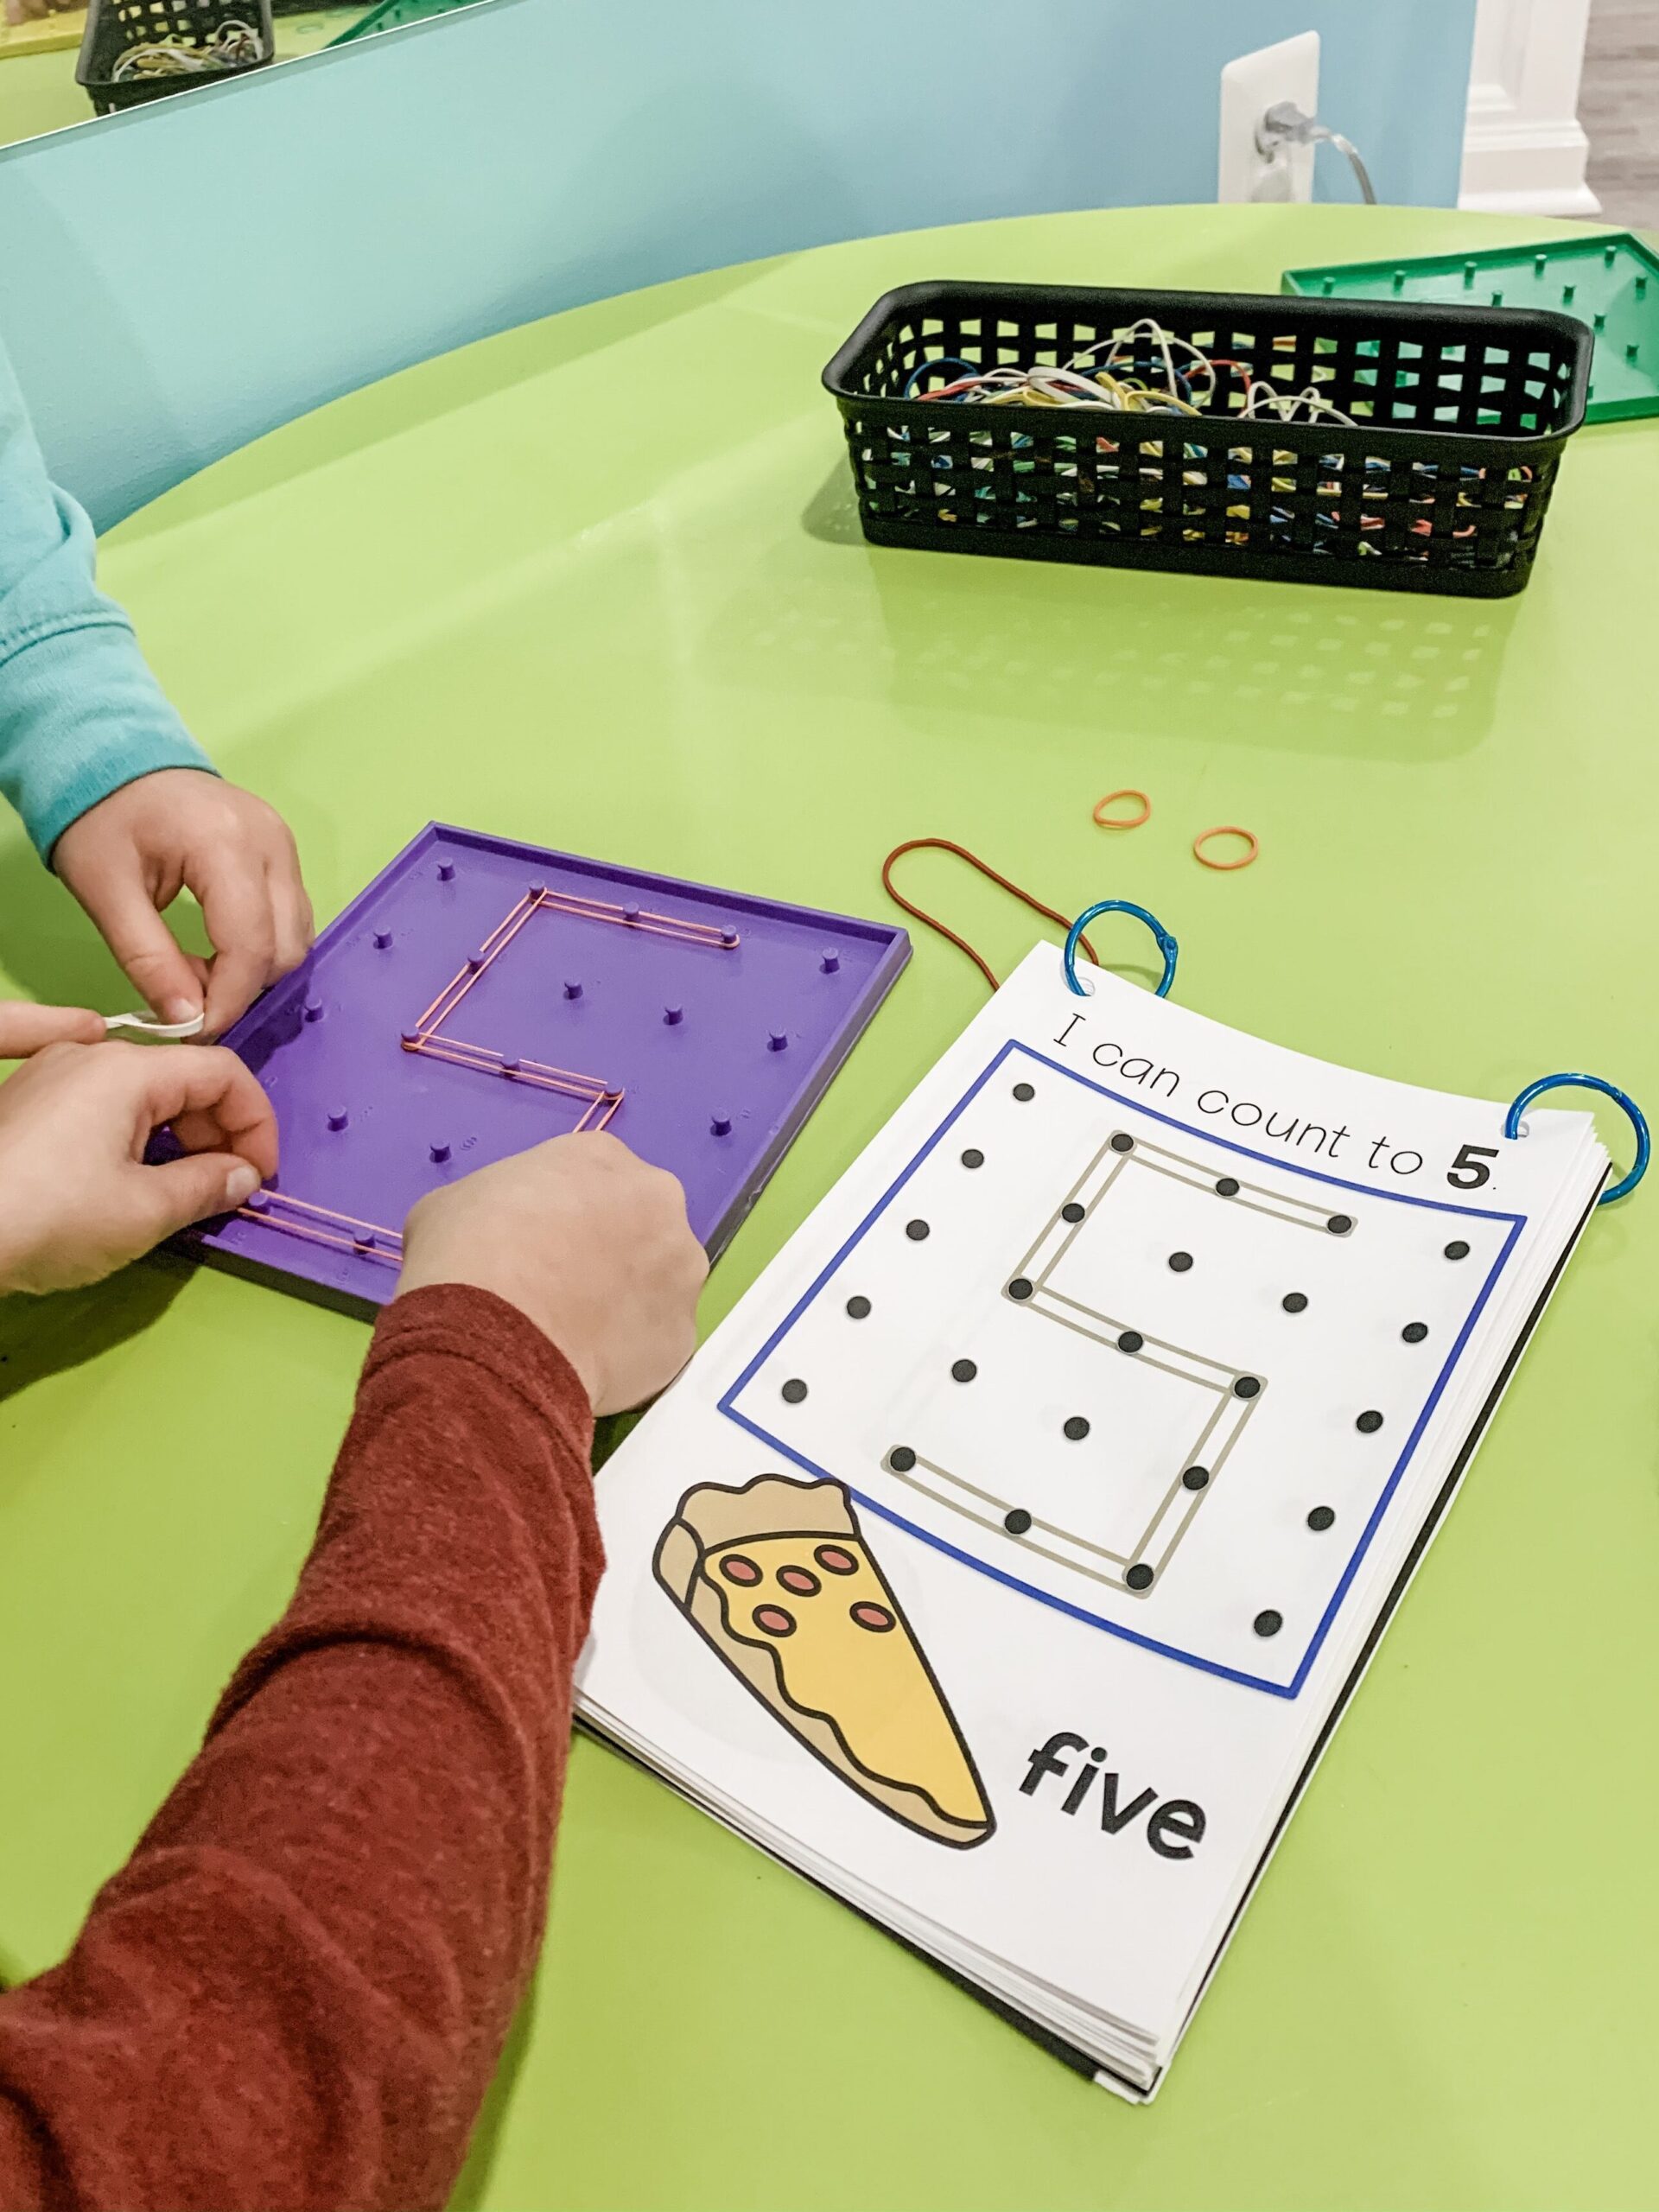 geoboard number templates